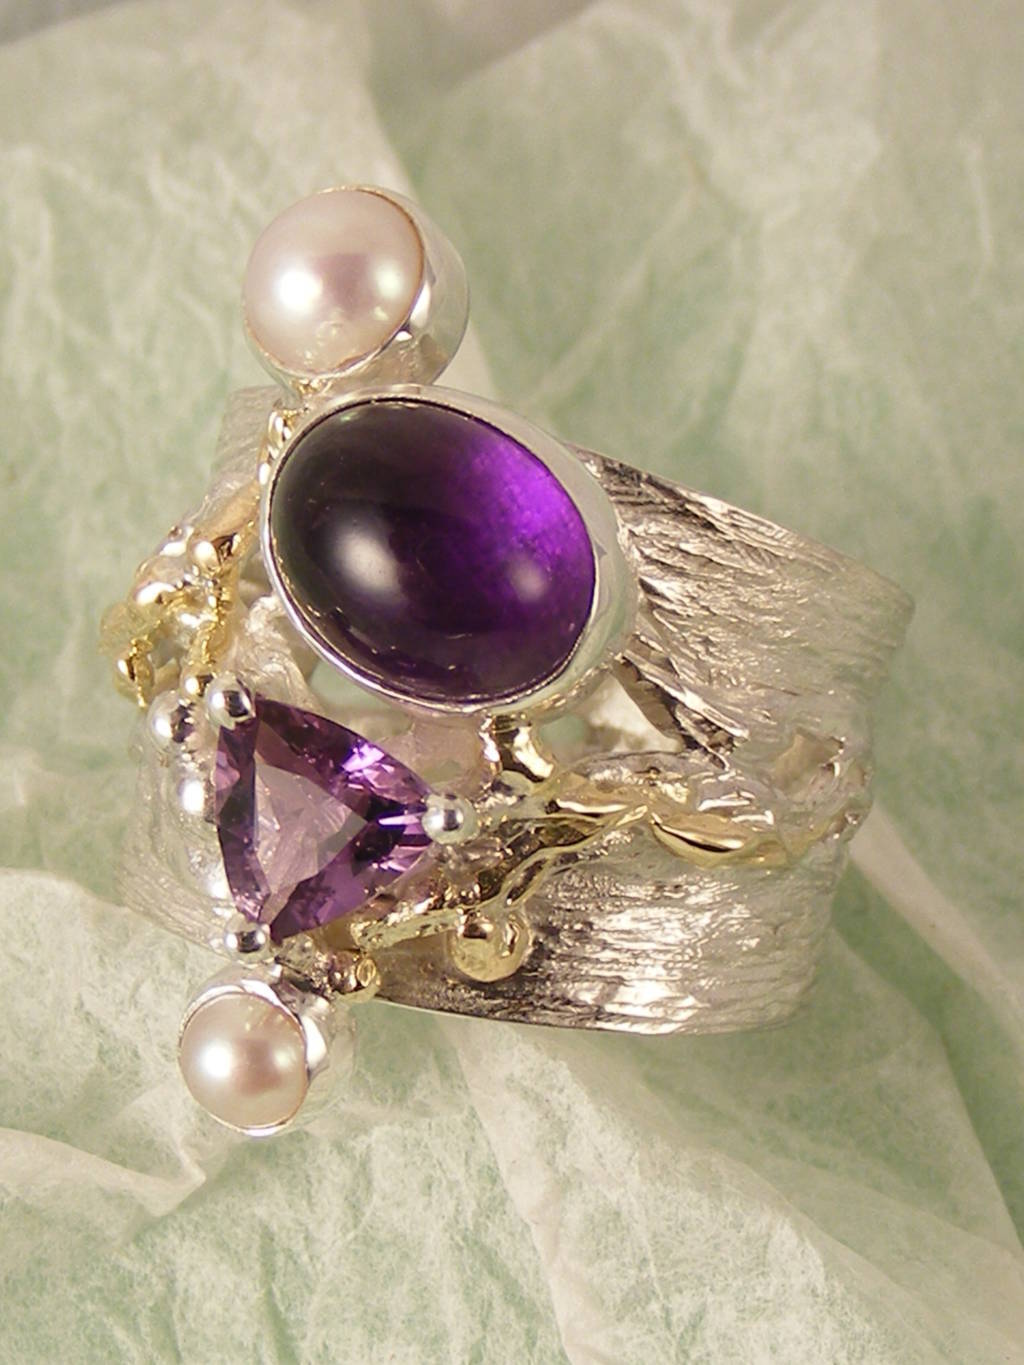 jewellery with seaside theme, jewellery with seashells theme, jewellery with nature theme, jewllery with ocean theme, jewelry made by artist, rings for women with amethysts and pearls, gregory pyra piro handcrafted ring 53821